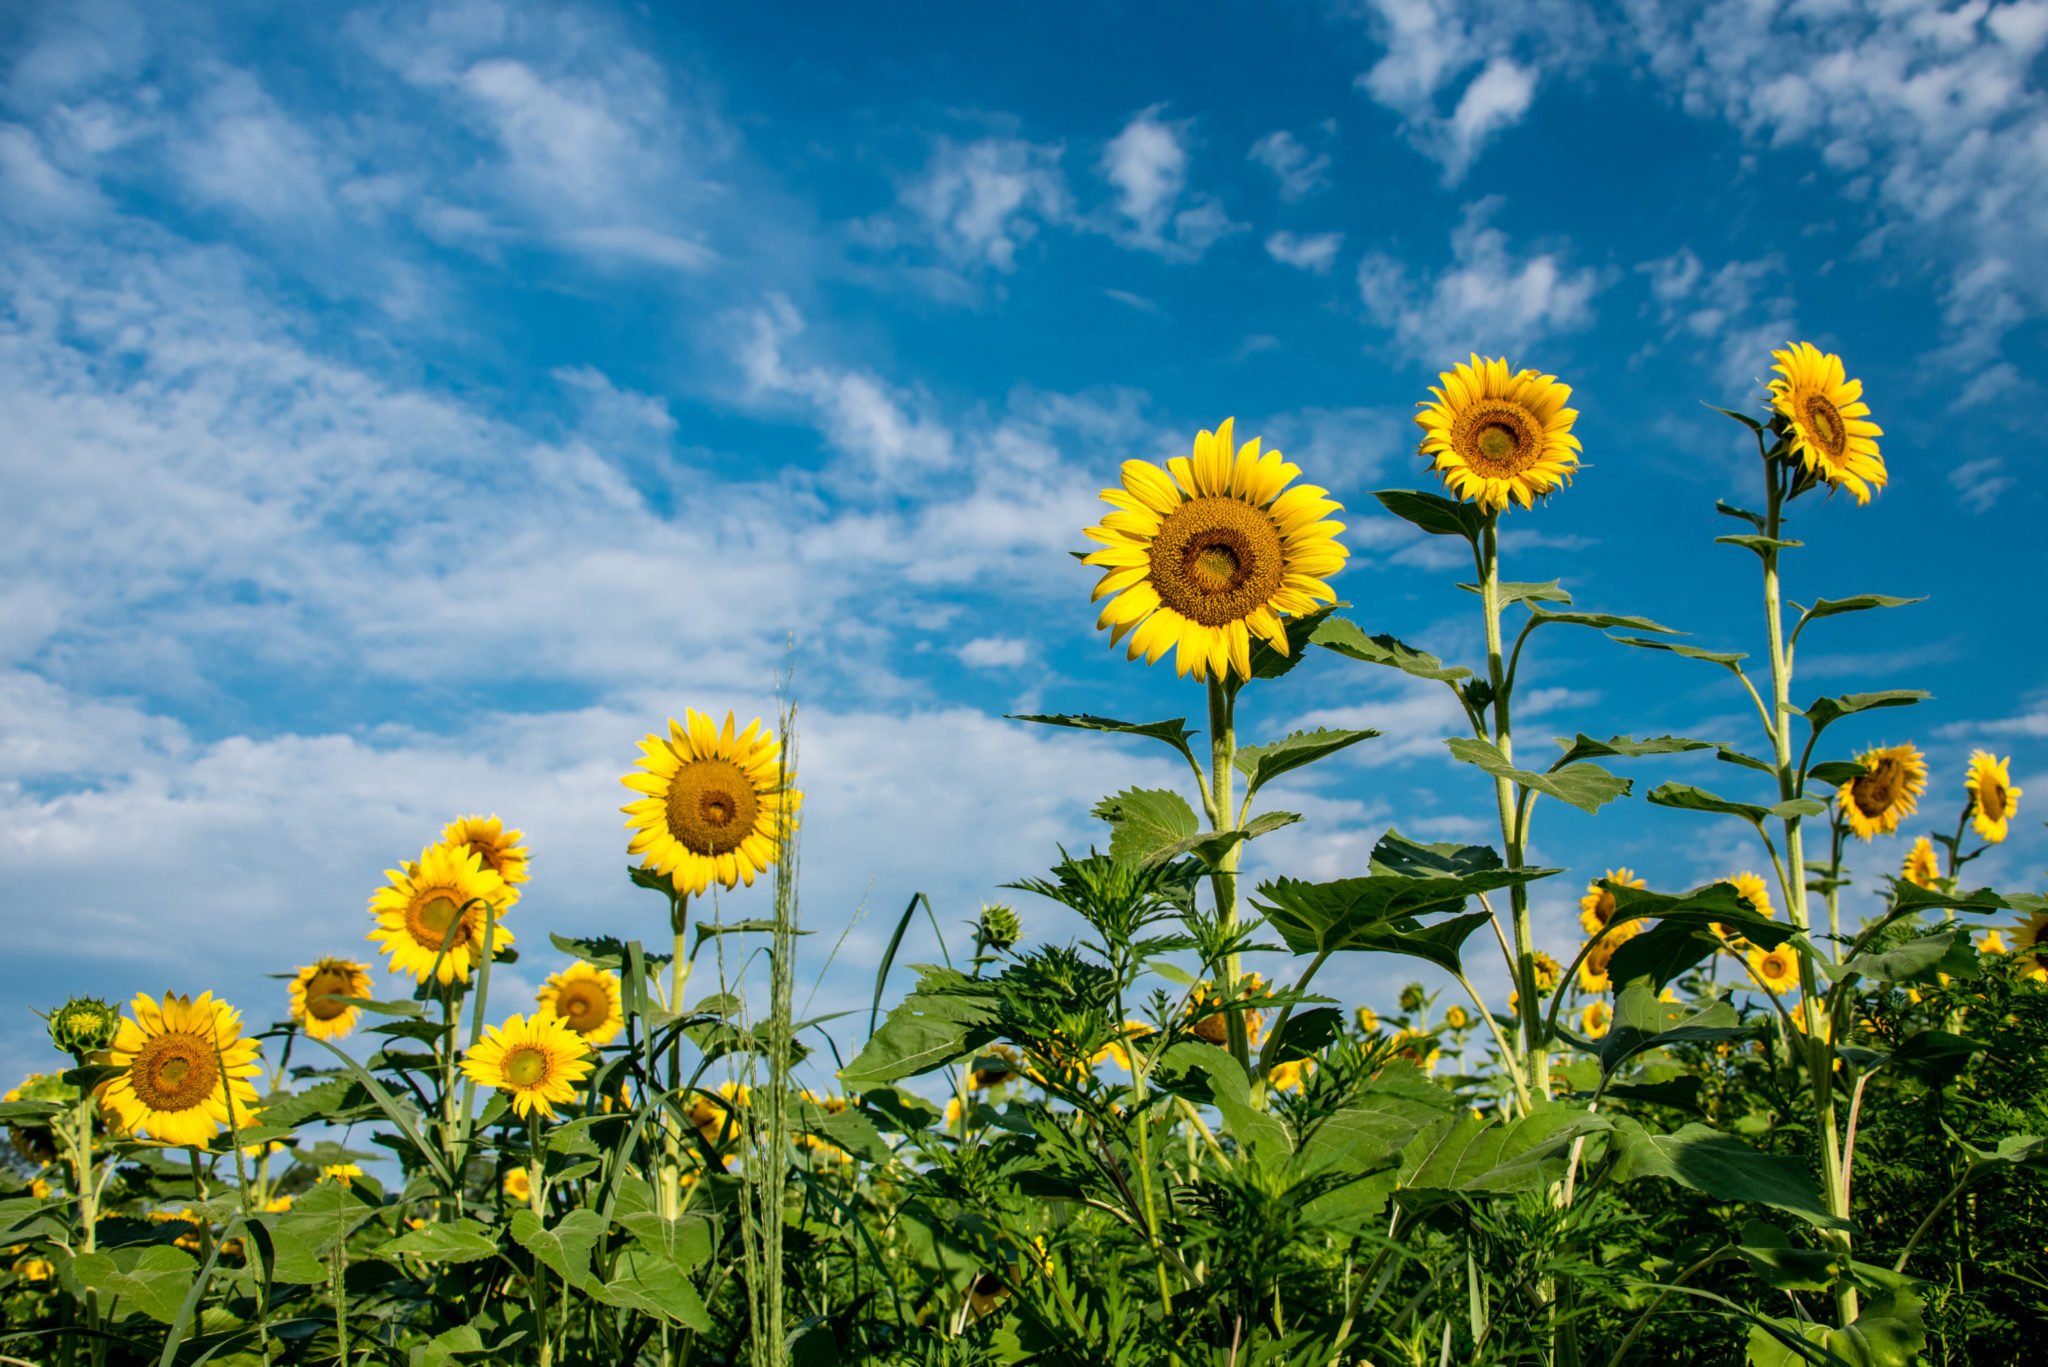 The sunflowers at Mckee-Beshers. Photo by Flickr user angela n.